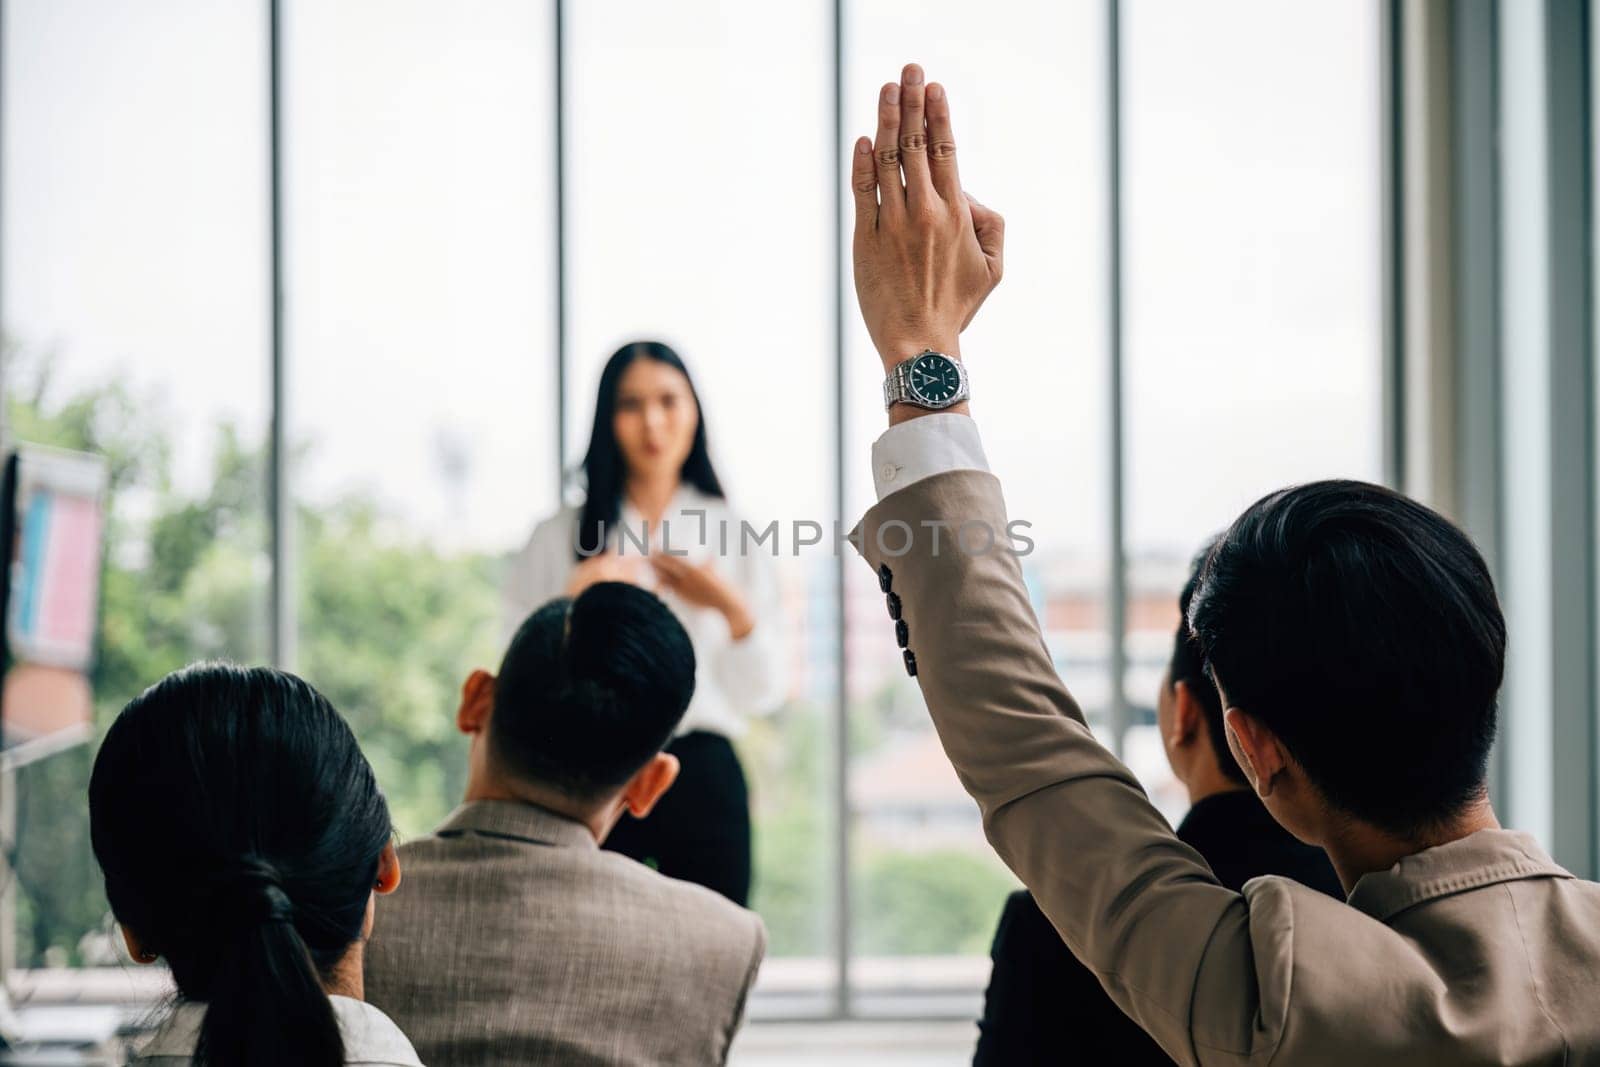 In a seminar classroom at a conference, a large group raises hands in participation. The engaged audience holds the answers, symbolizing collaborative learning. by Sorapop